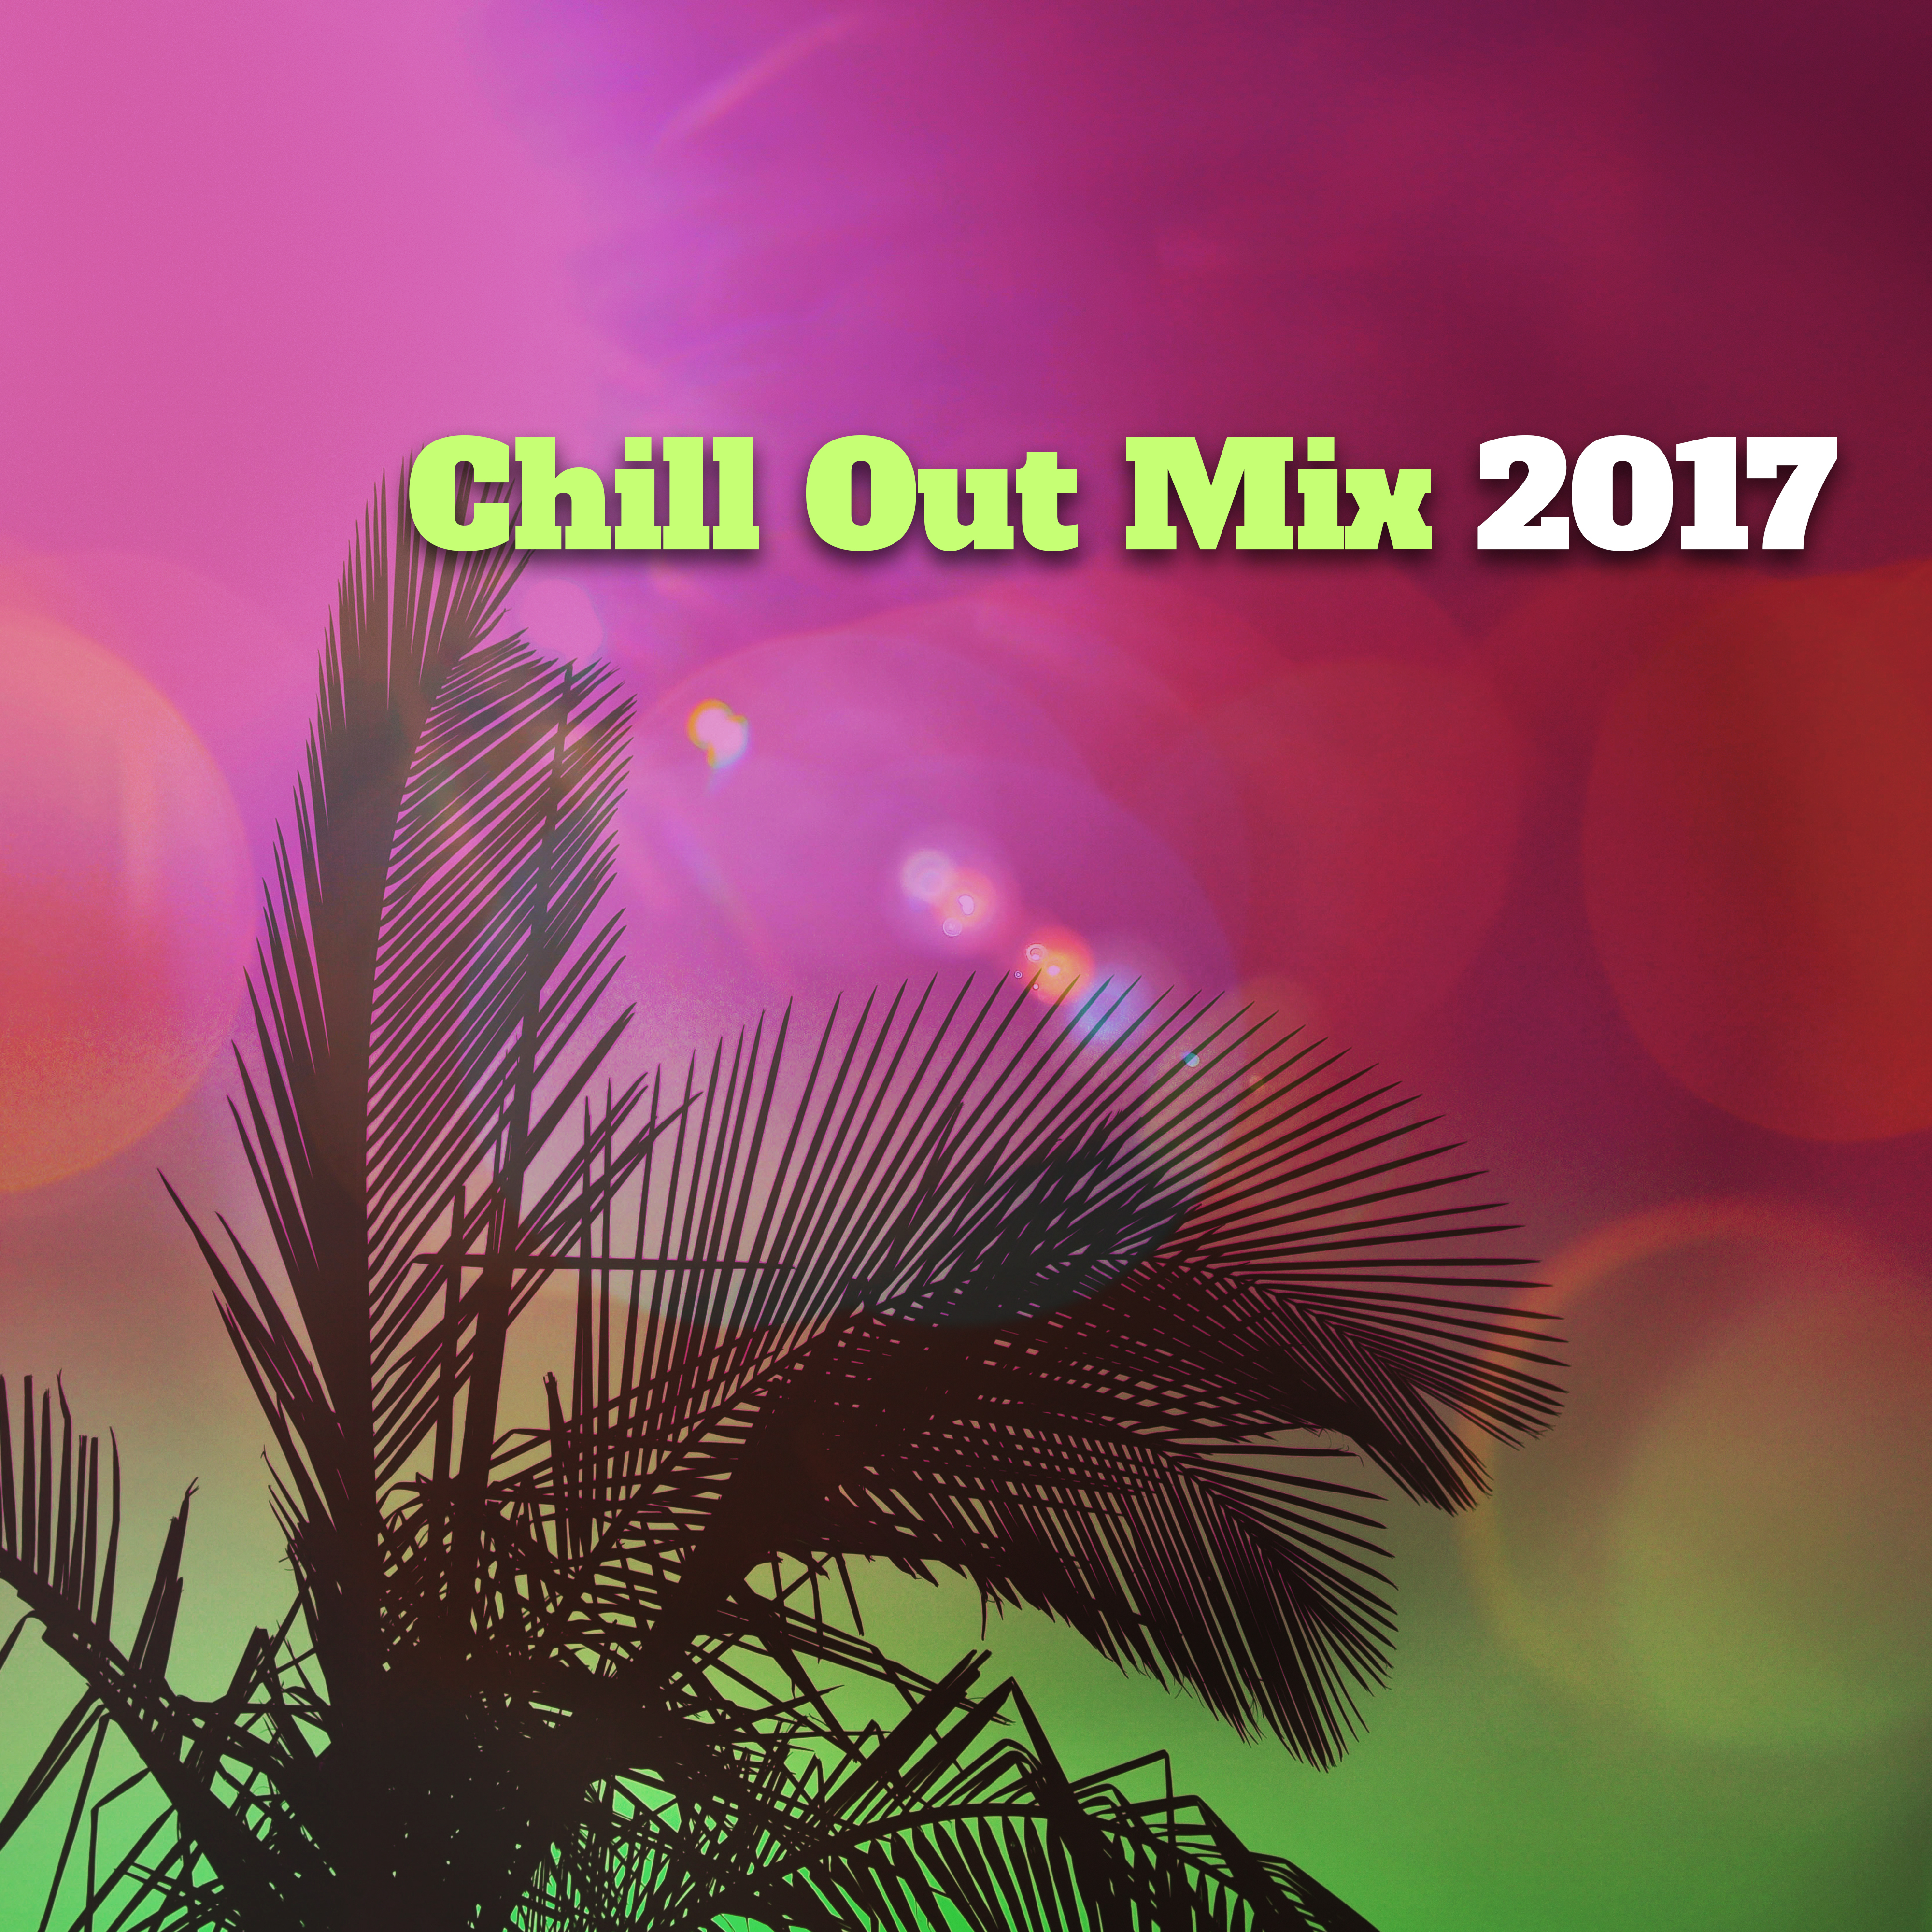 Chill Out Mix 2017 – Summer Songs, Holiday Music, Relax on the Beach, Sunrise Melodies